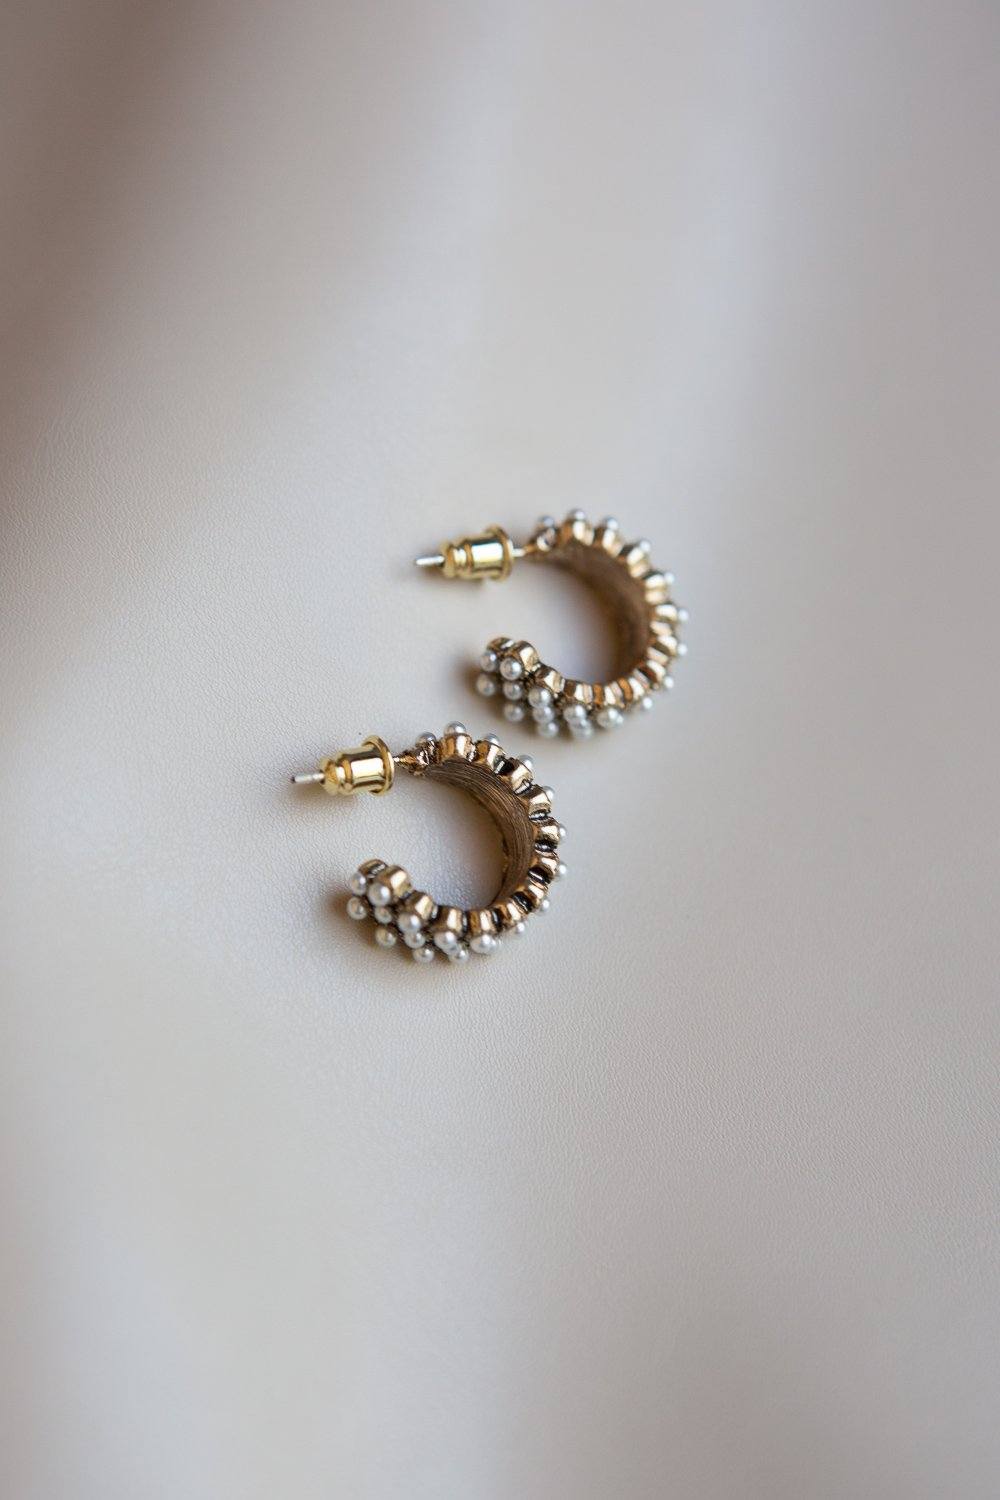 Antique Gold Hoops with Pearl Accents - Wynter Bloom